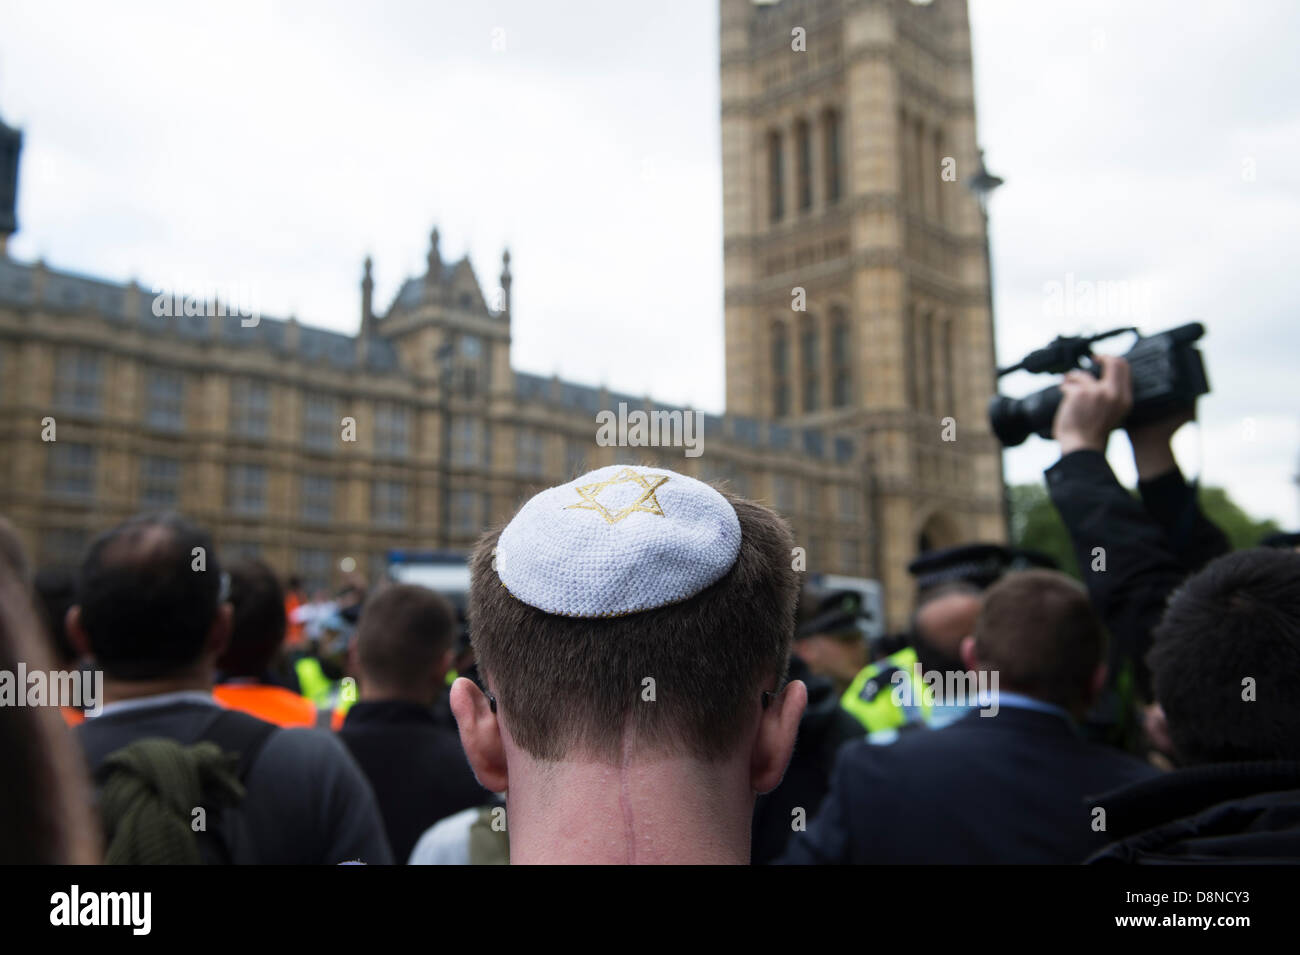 Anti-fascist, anti-Nazi party protest outside Parliament, London. A Jewish male wears a white skull cap with a gold Star of David embroidered on it. Stock Photo